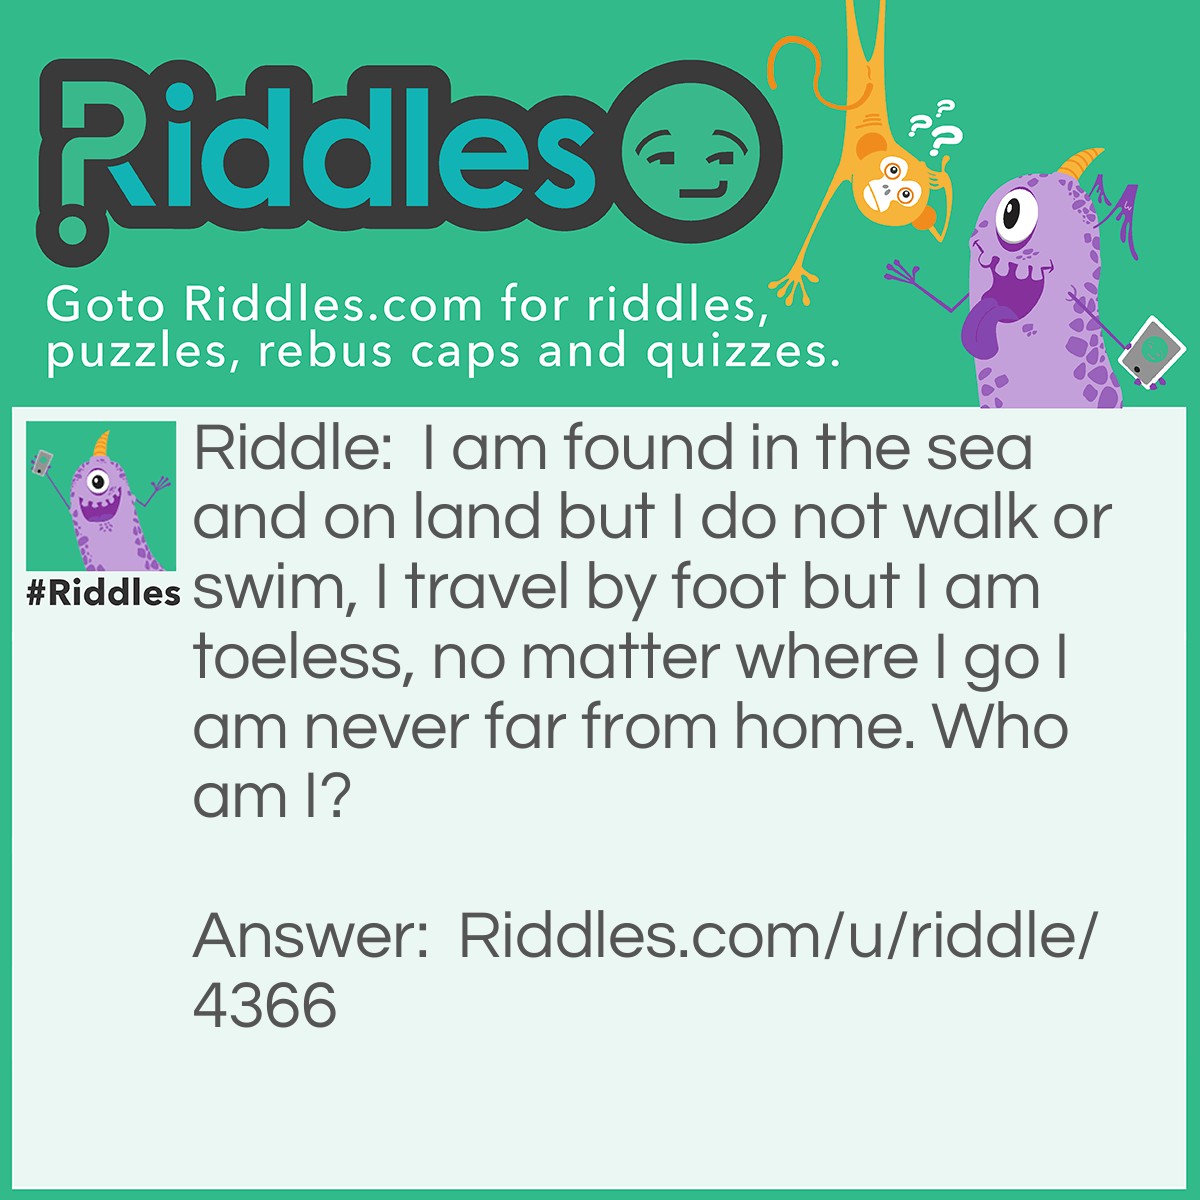 Riddle: I am found in the sea and on land but I do not walk or swim, I travel by foot but I am toeless, no matter where I go I am never far from home. Who am I? Answer: A snail.